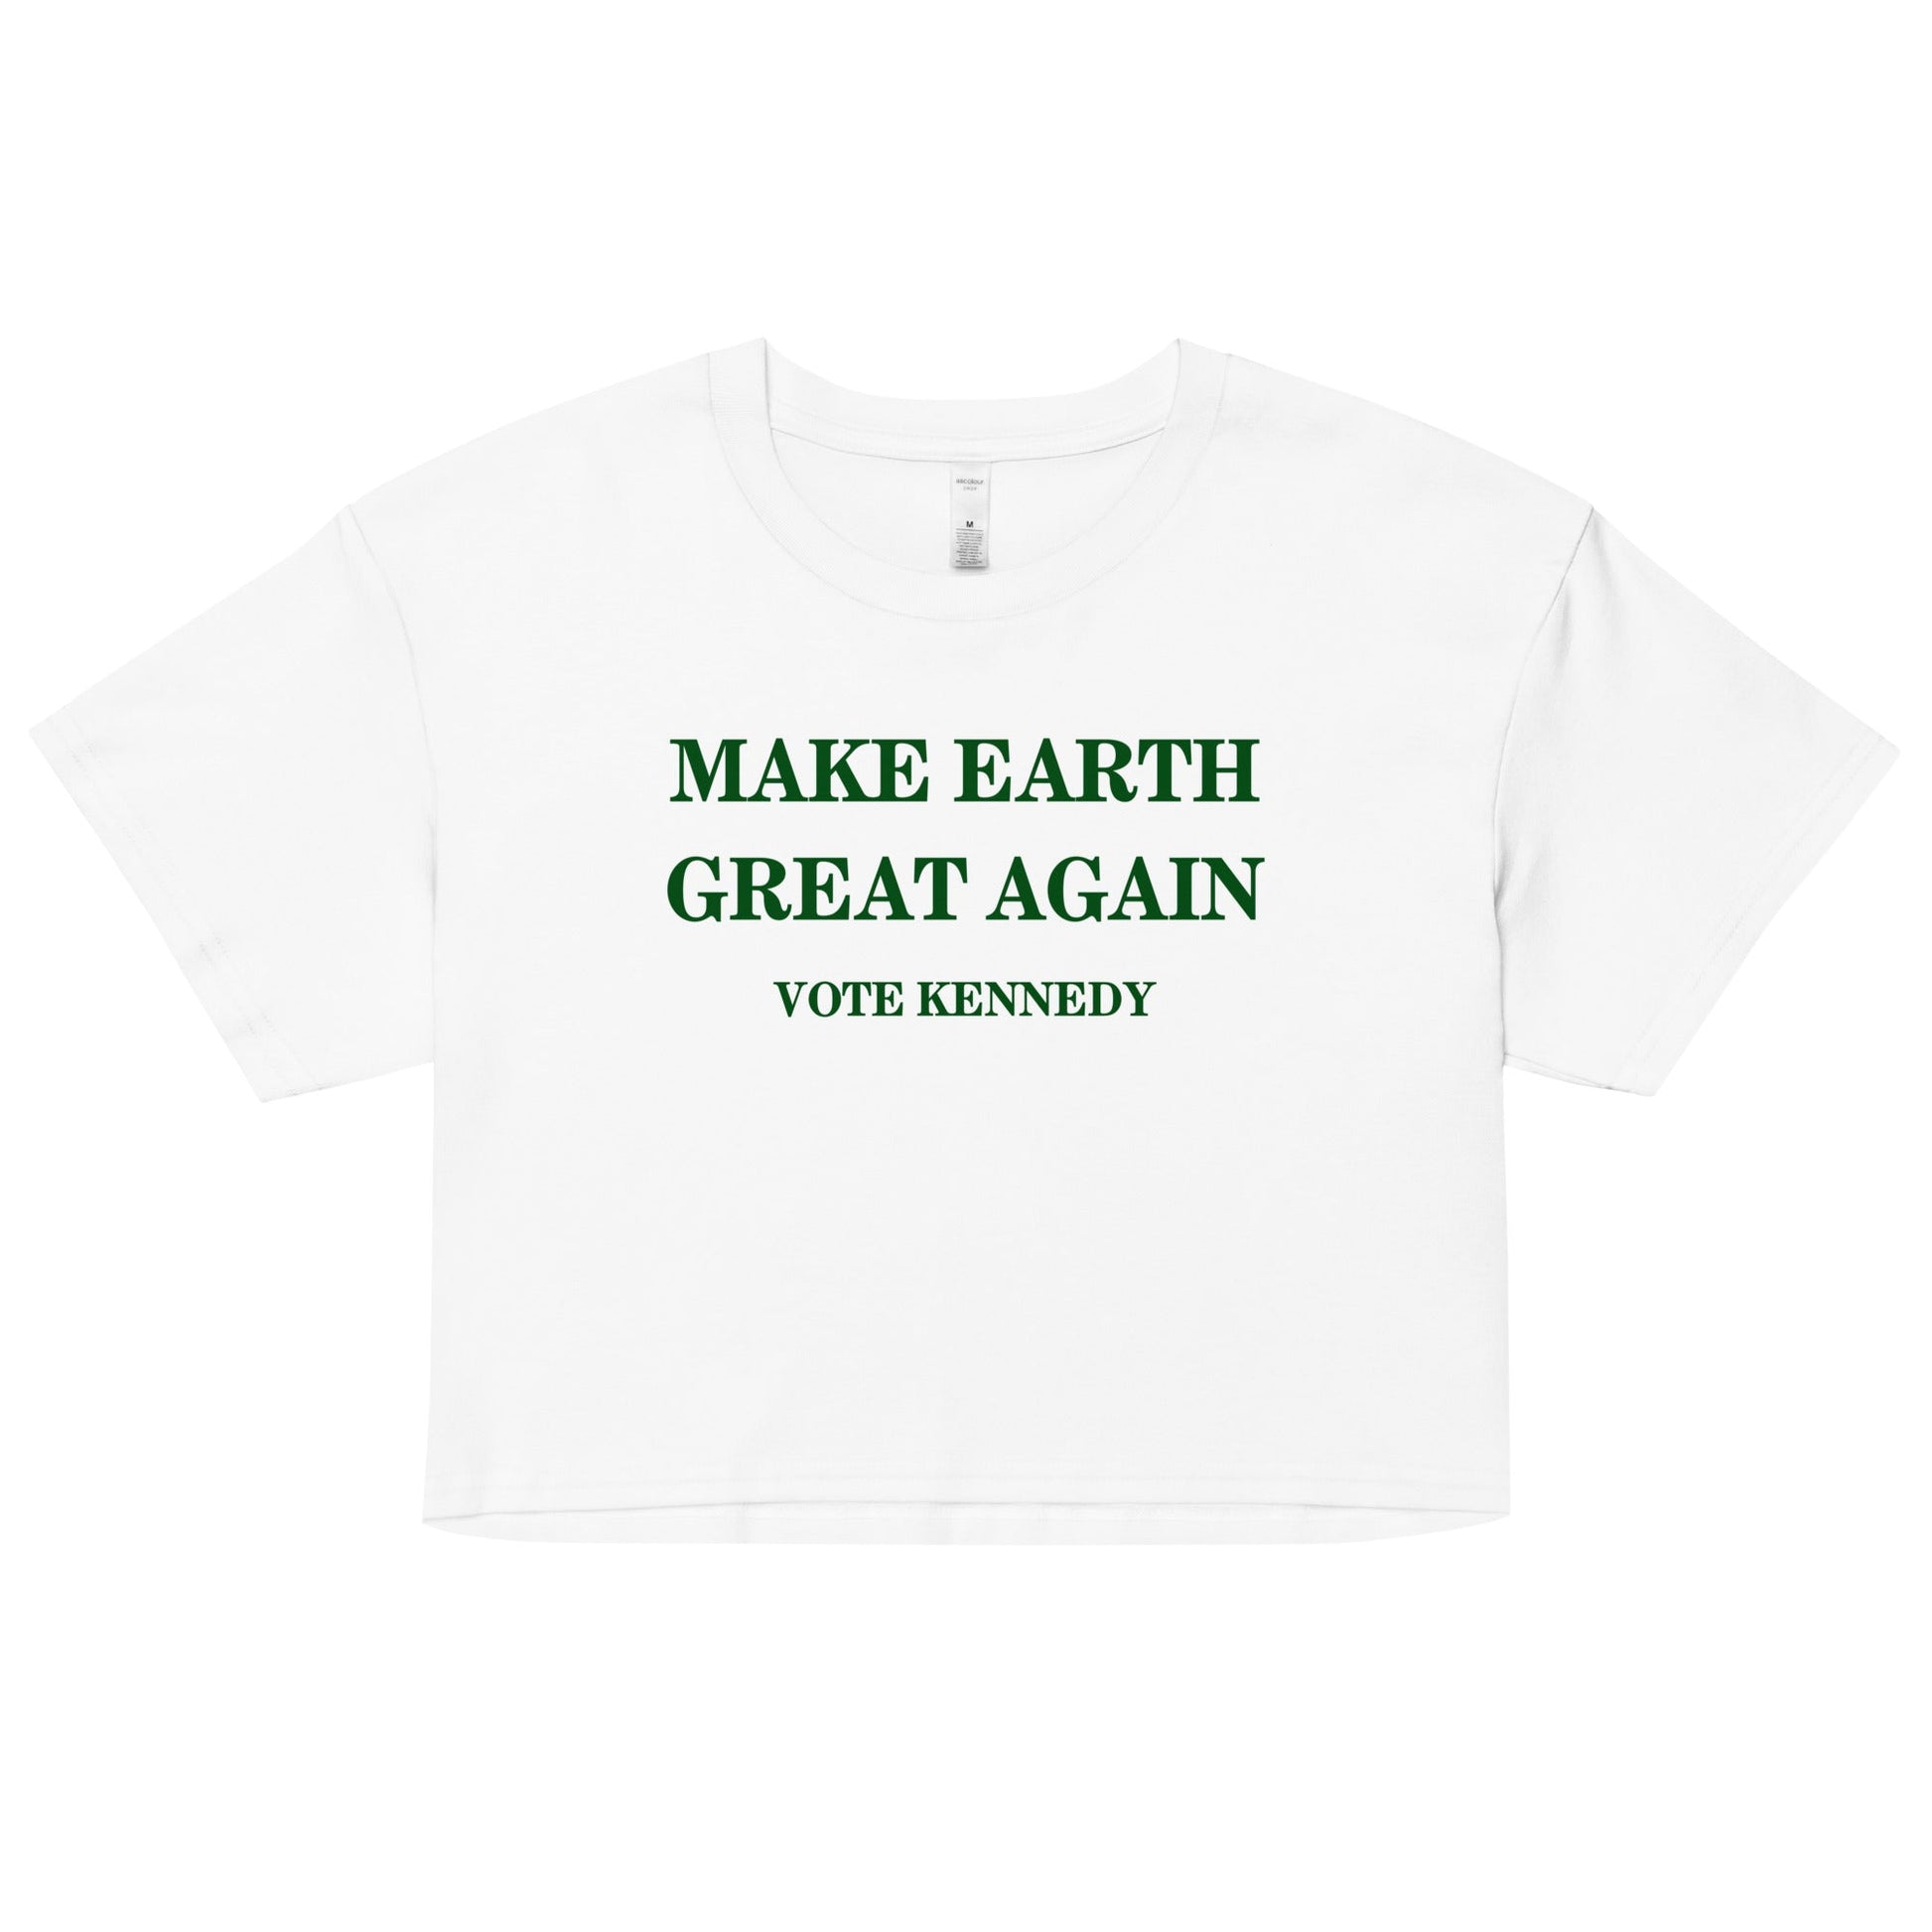 Make Earth Great Again Women’s Crop Top - TEAM KENNEDY. All rights reserved